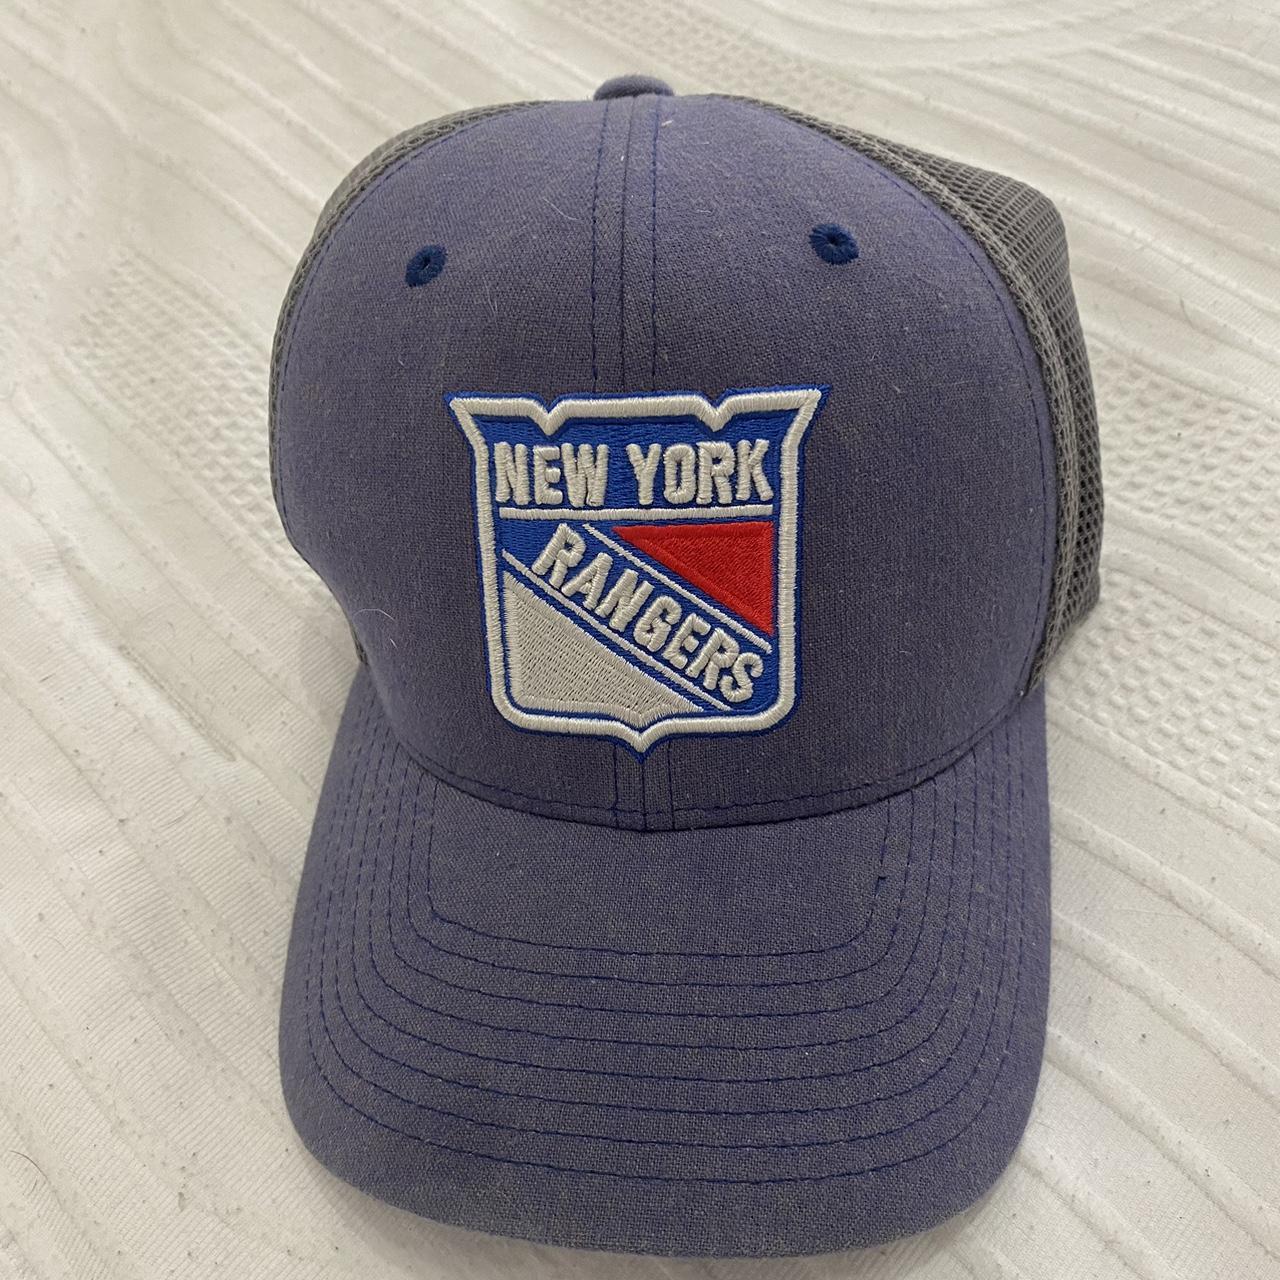 New York rangers fitted hat #rangers #hats #NHL - Depop